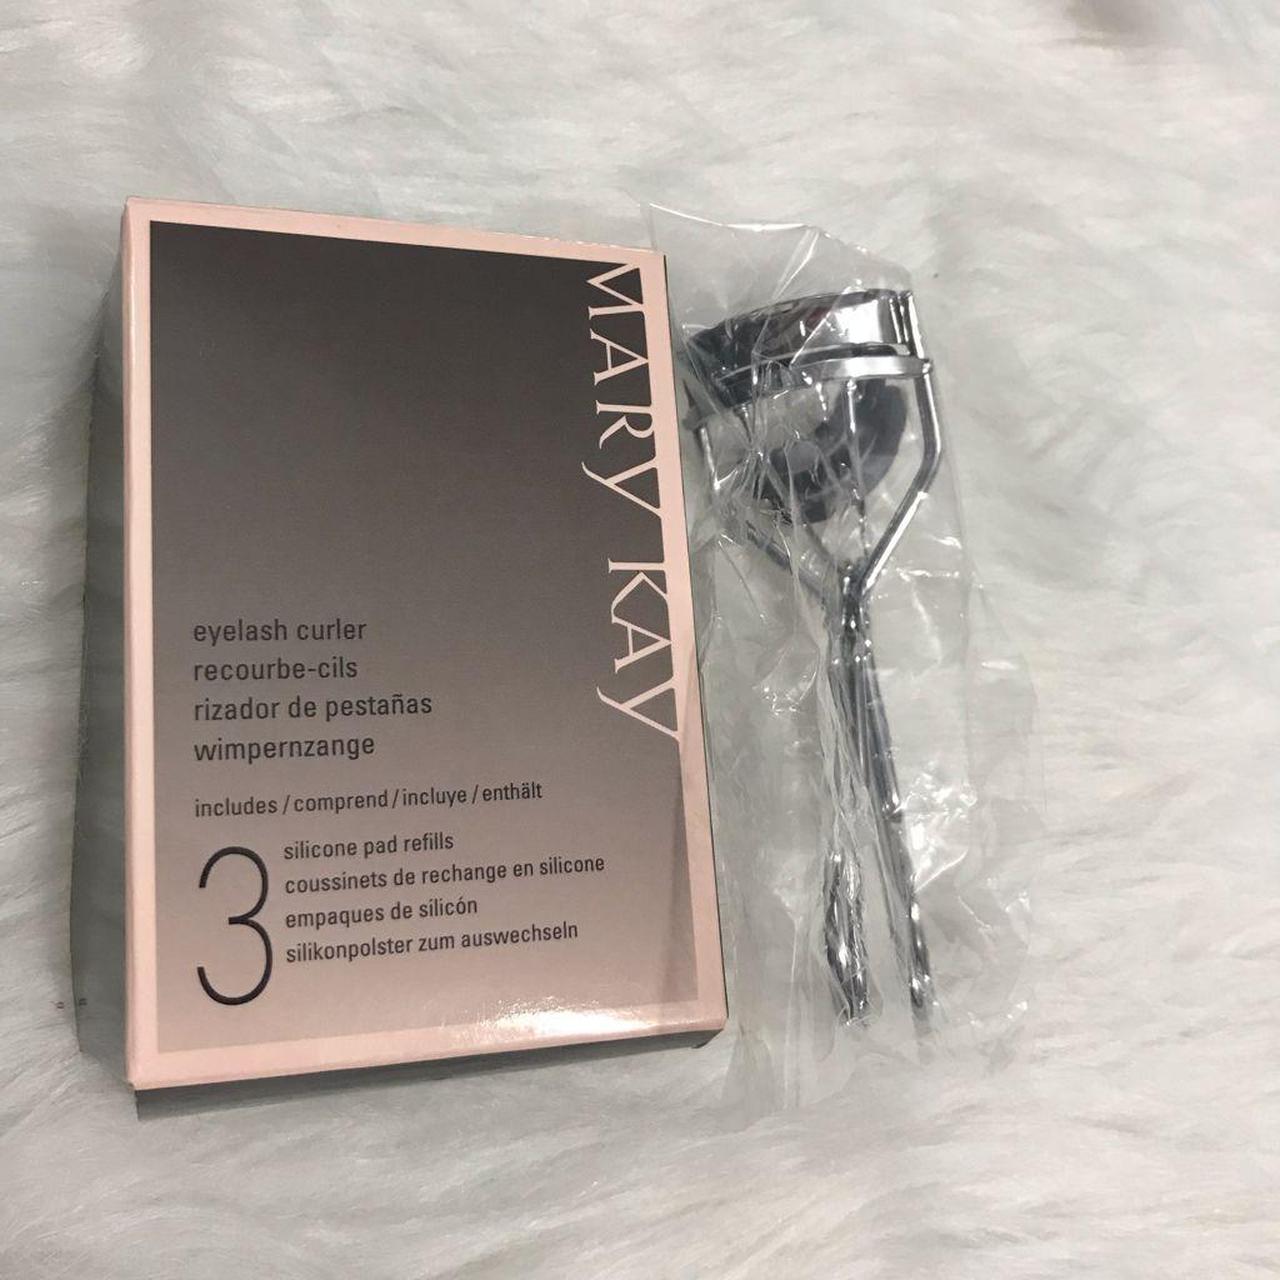 Product Image 1 - Mary Kay eye lash curler
Includes